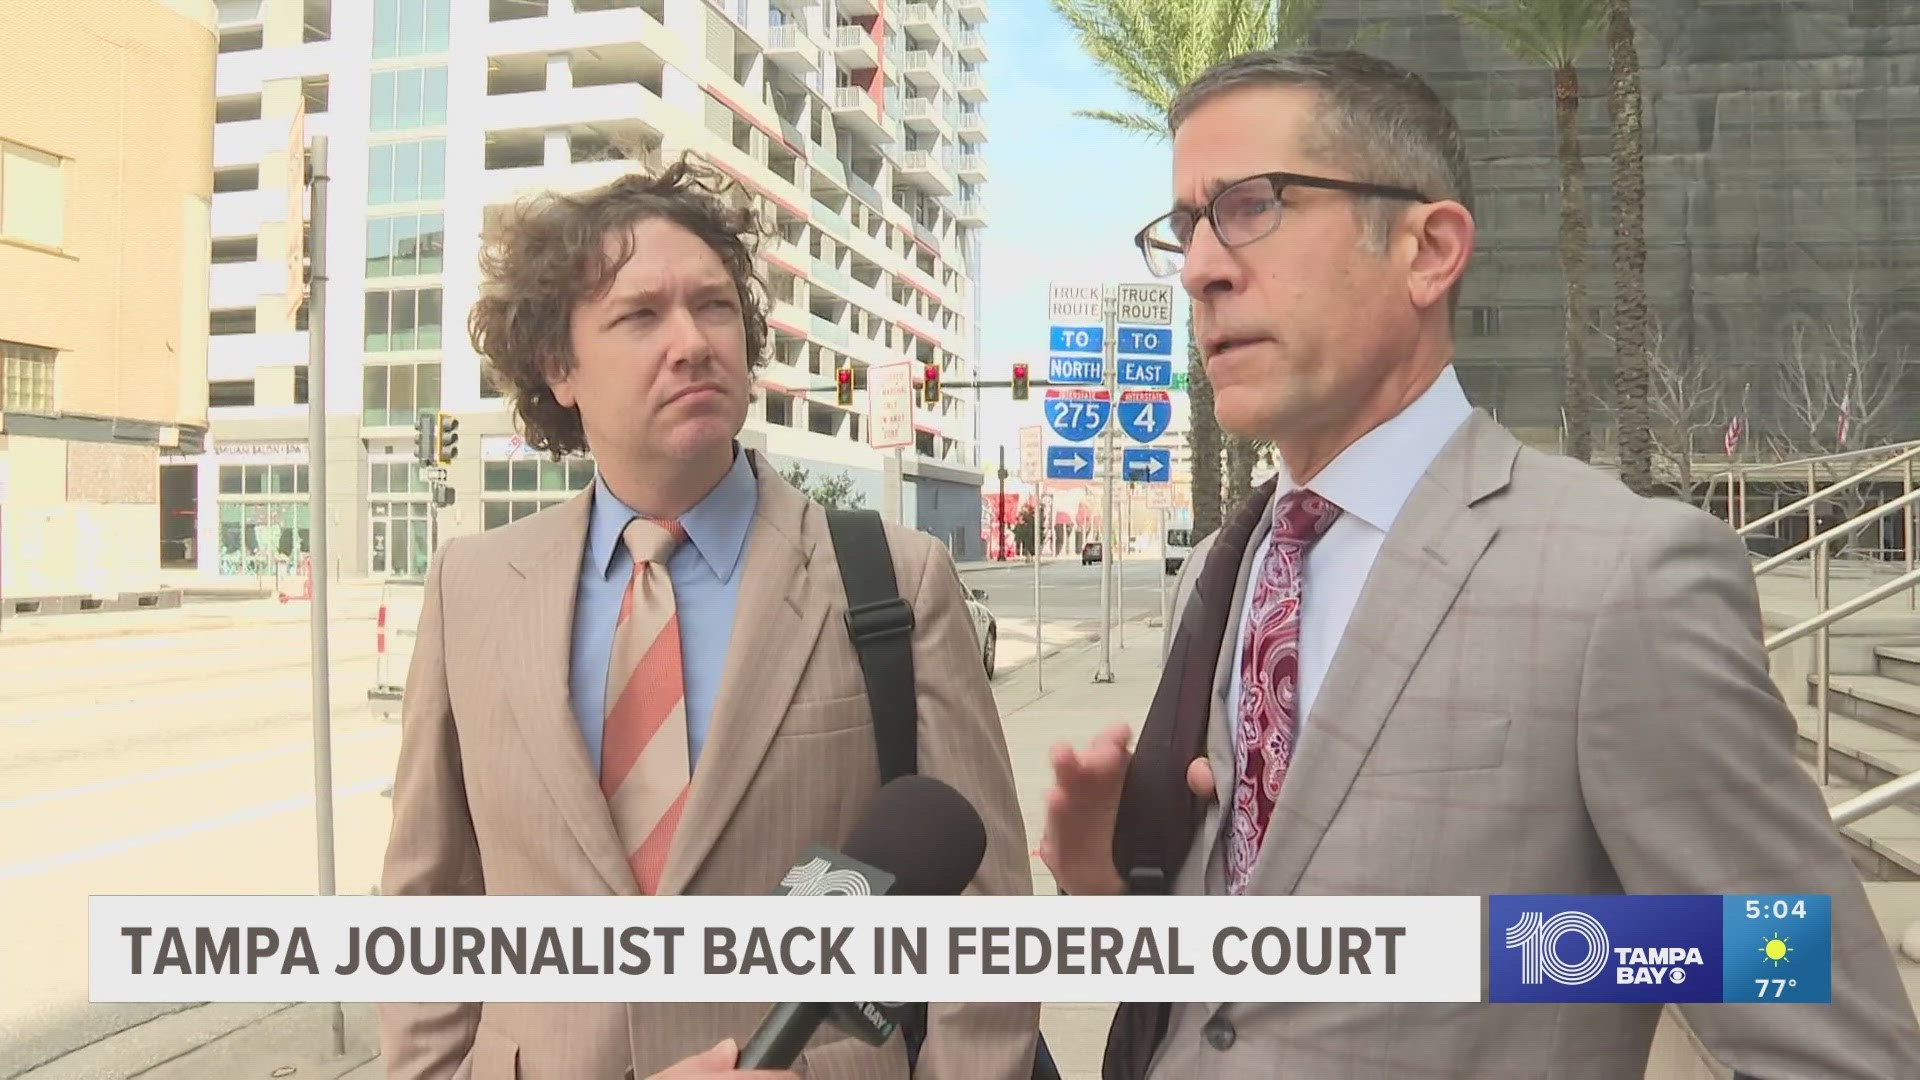 Burke is facing 14 federal charges, but his lawyer maintains he did nothing but “good journalism.”